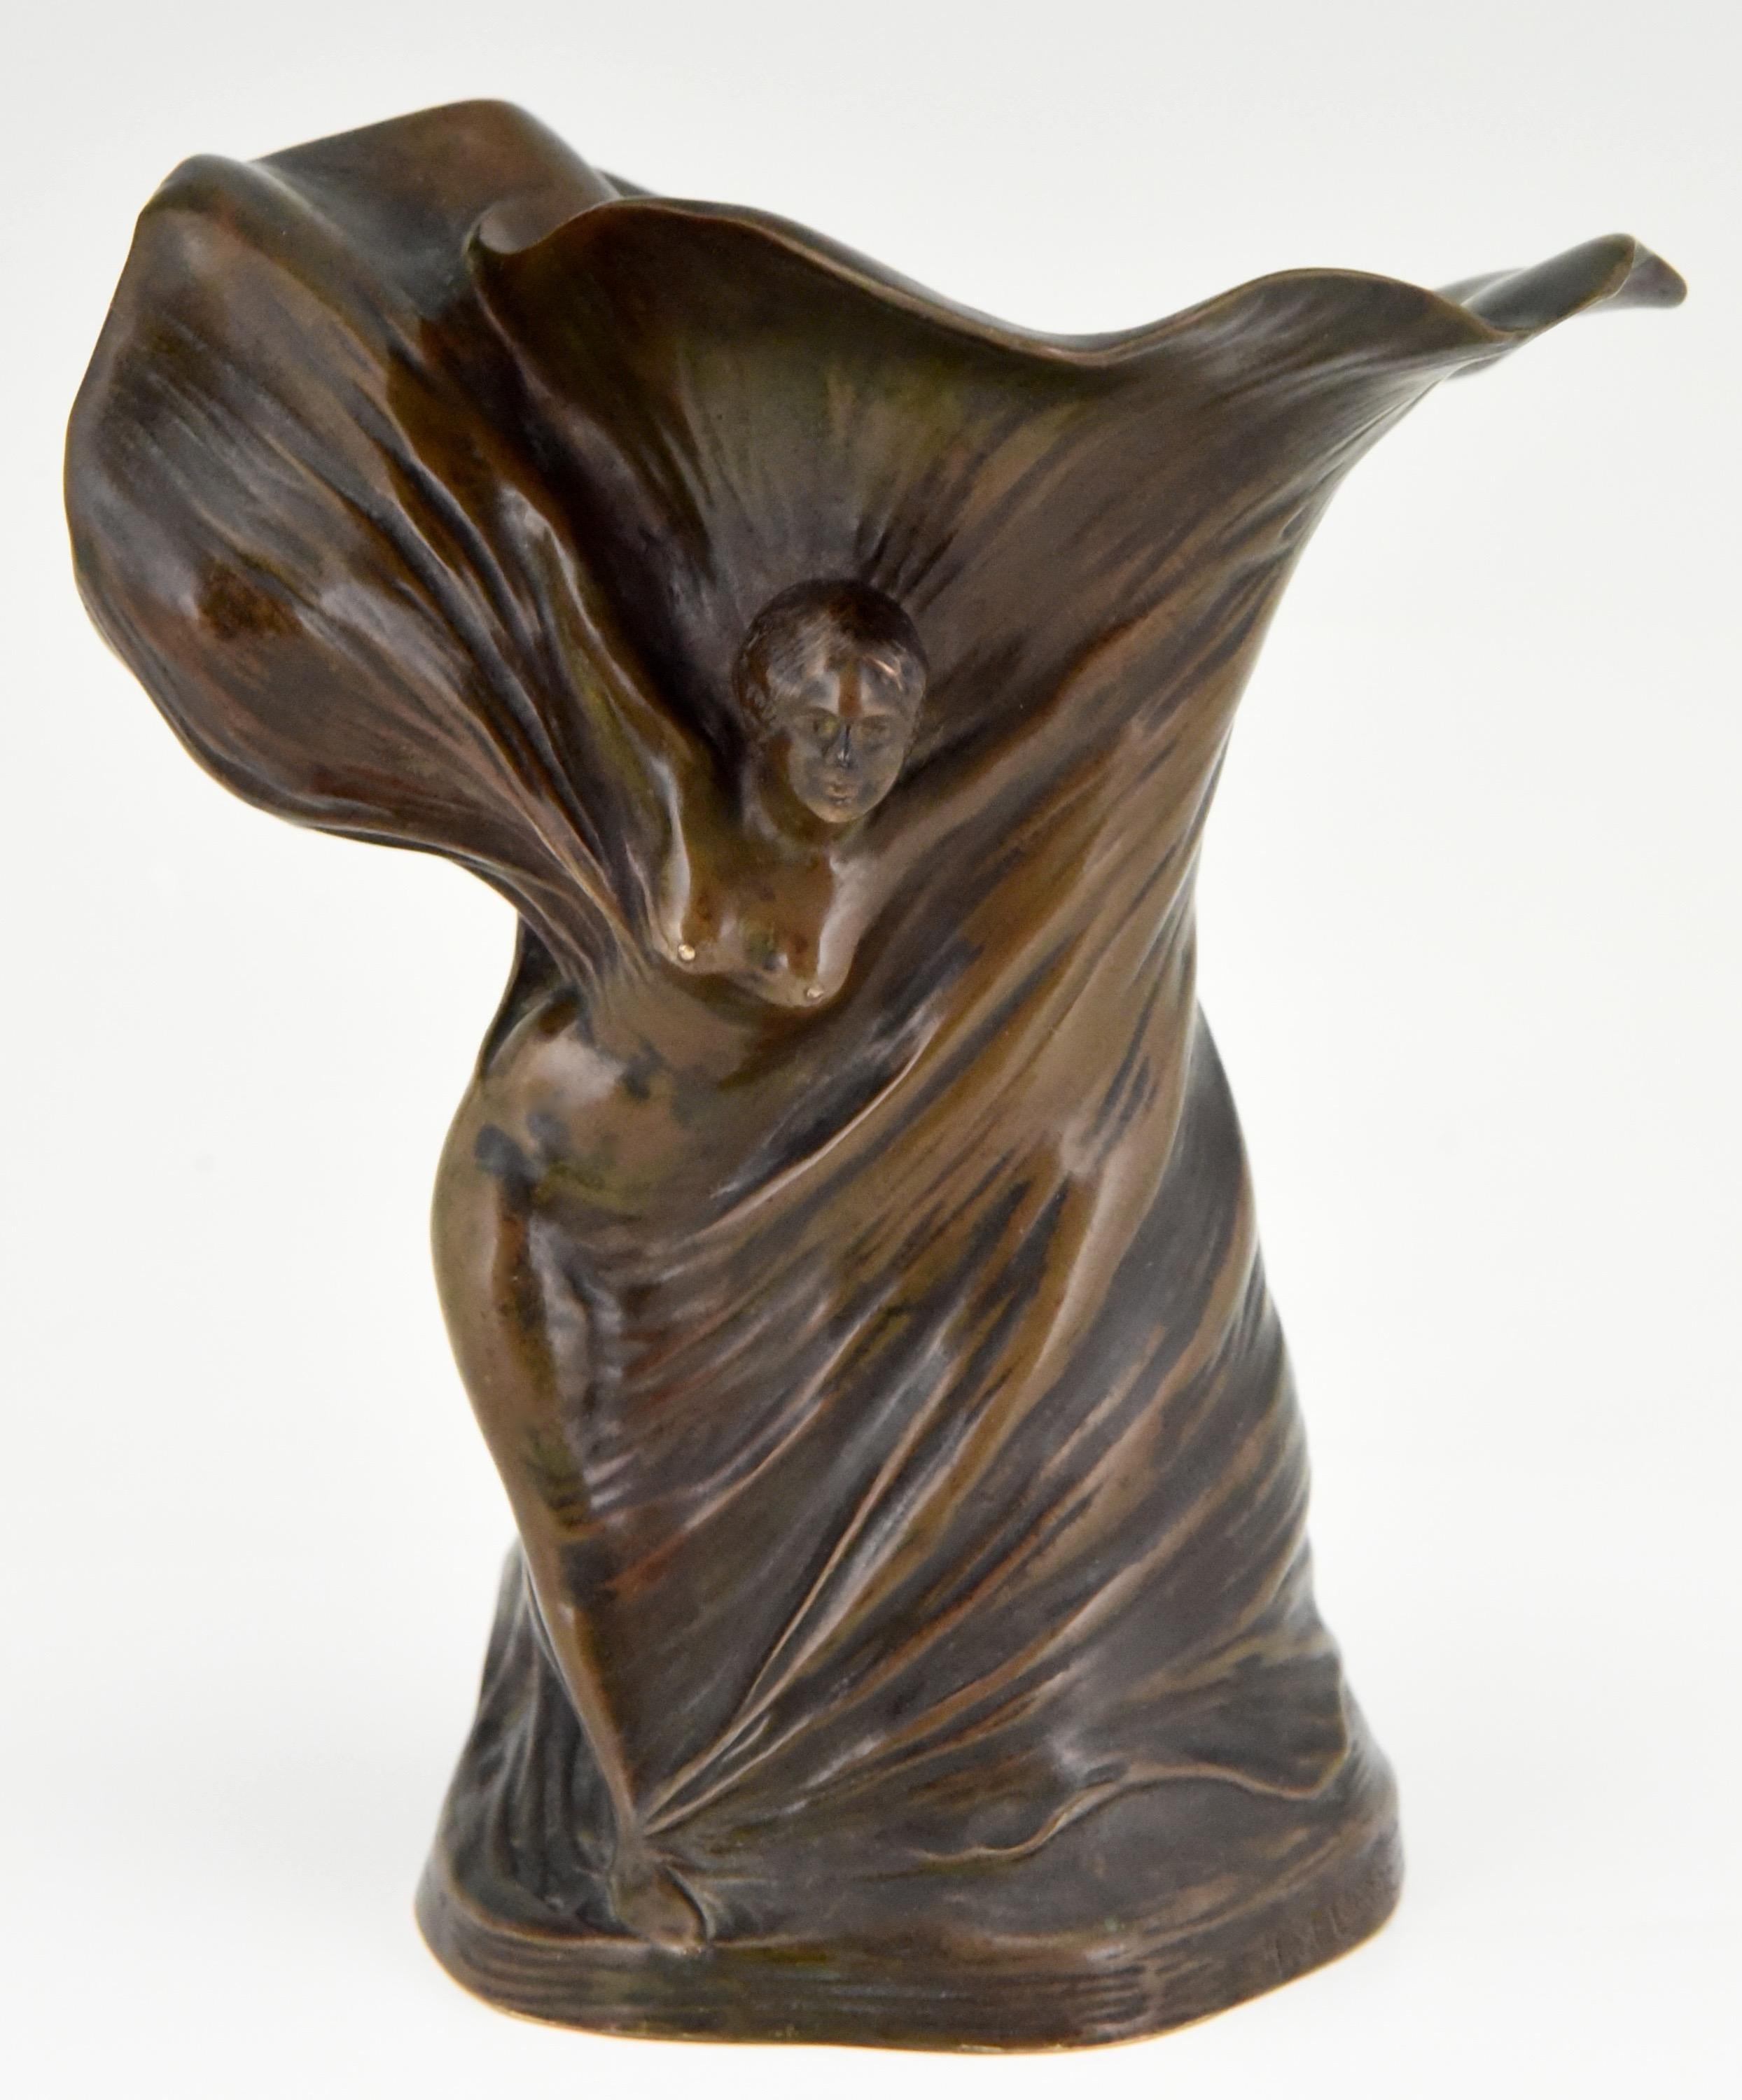 Beautiful Art Nouveau vase in patinated bronze depicting the famous dancer Loïe Fuller. The vase is signed by the artist Hans Stoltenberg Lerche (1867-1920) and has the Louchet founders' signature, France, circa 1900.

Literature:
This vase is